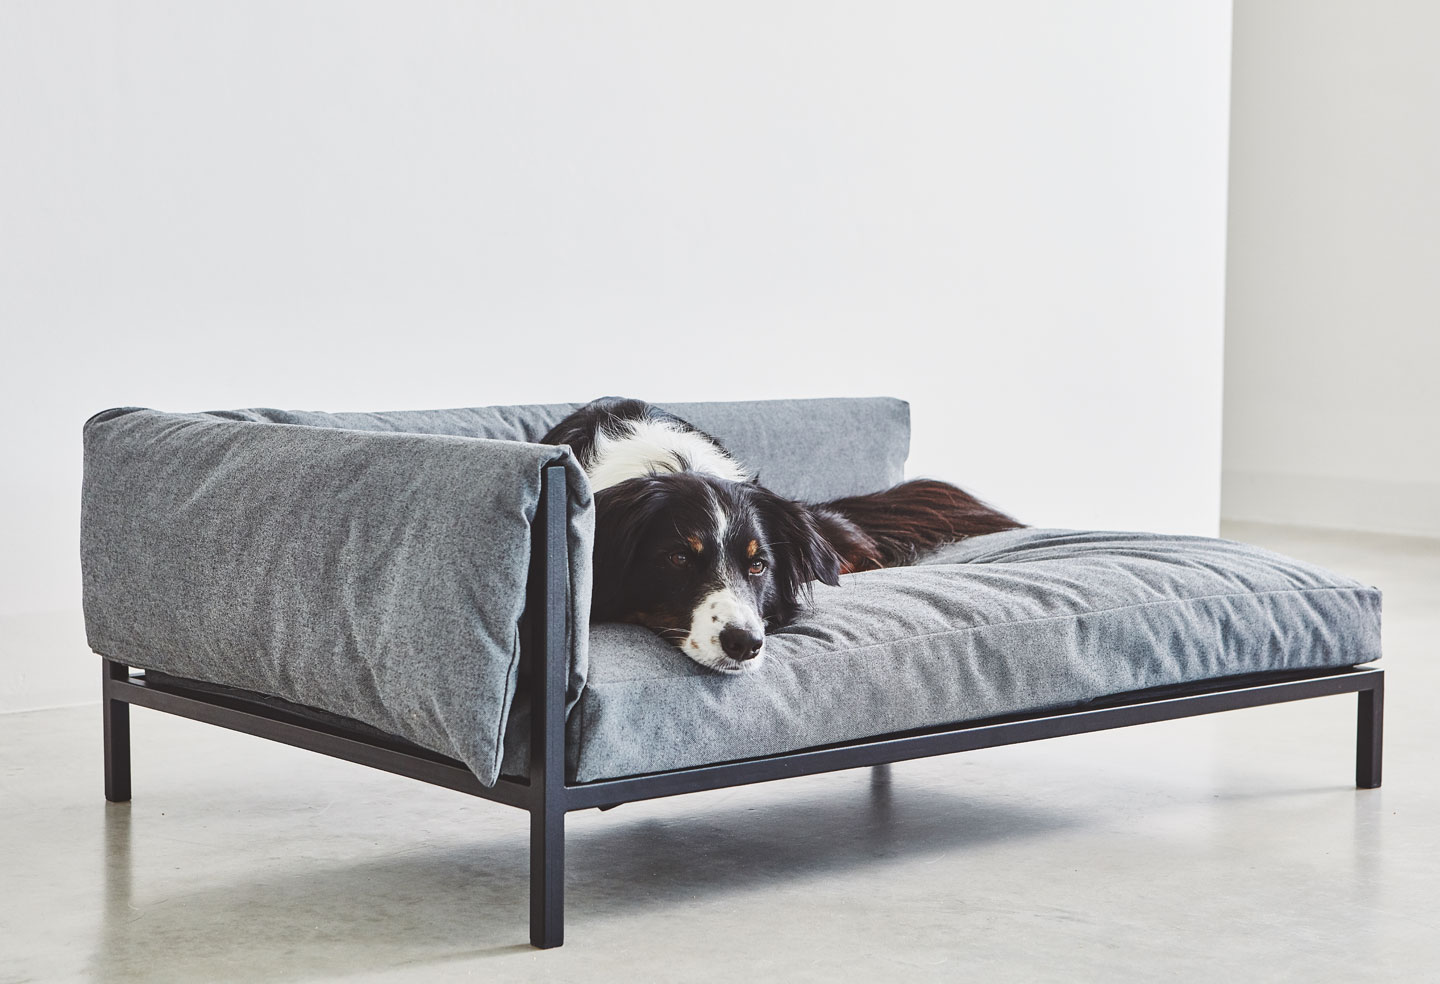 Design-Forward Pet Furniture That Purrfectly Blends in With Your Home ...